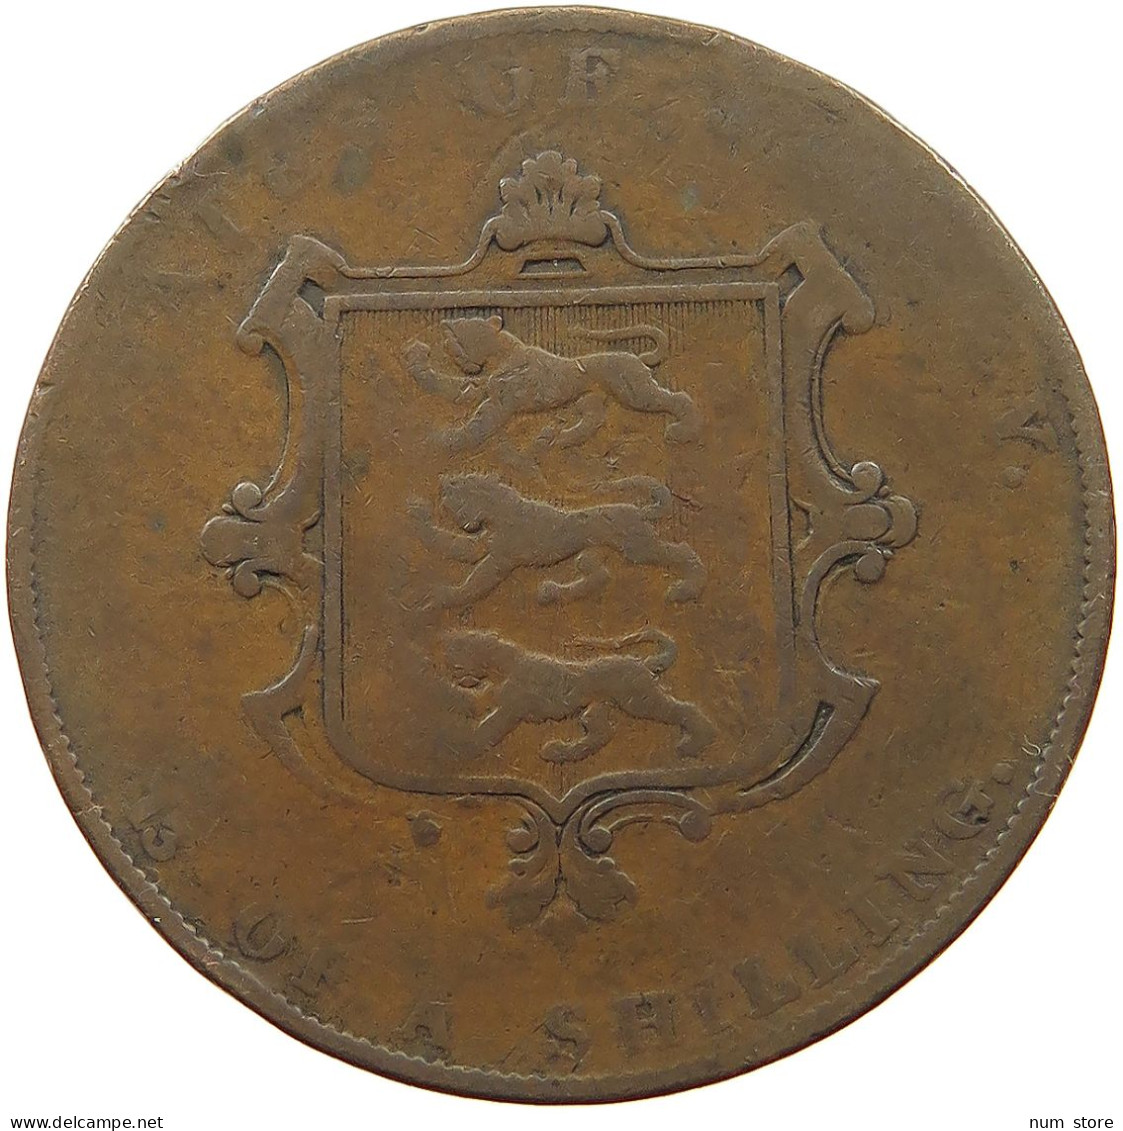 JERSEY 1/13 SHILLING 1844 Victoria 1837-1901 #a009 0359 - Jersey